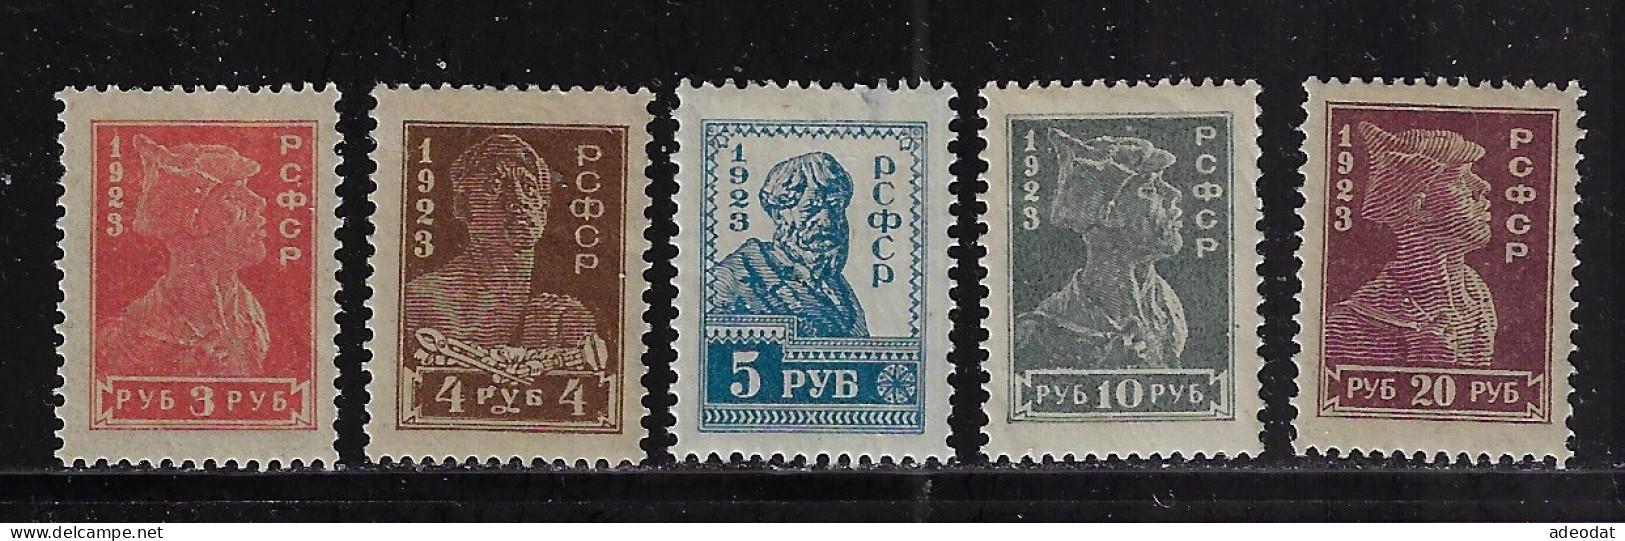 RUSSIA  1923 SCOTT #238-241A  MH - Unused Stamps